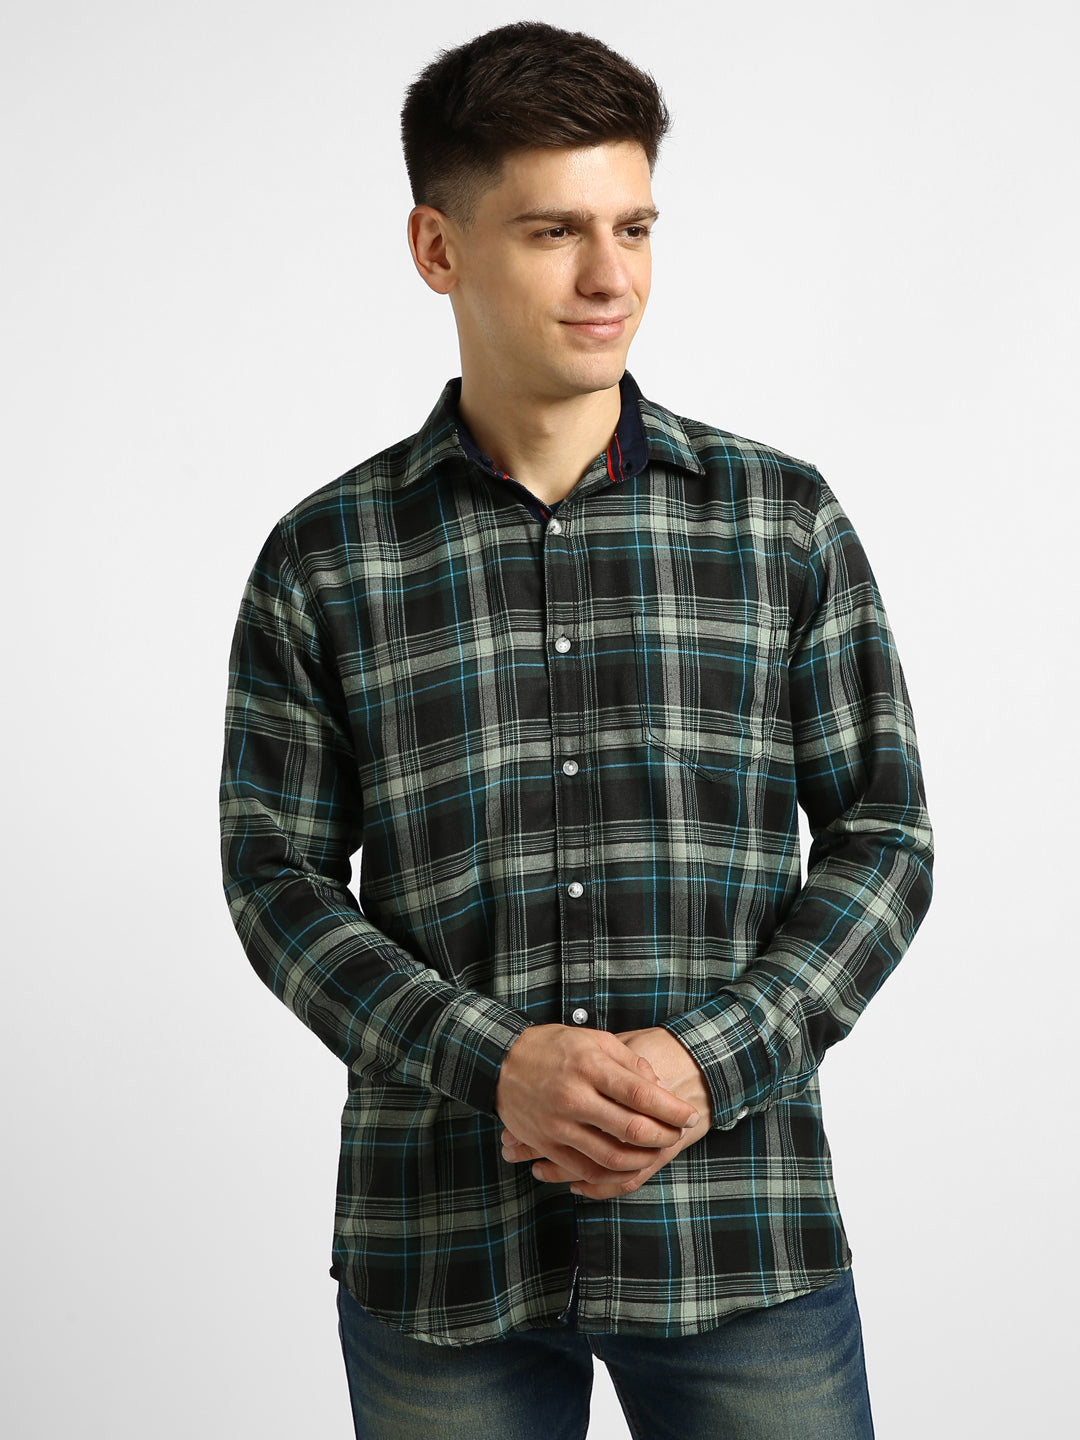 Men's Green Cotton Full Sleeve Slim Fit Casual Checkered Shirt with Hooded Collar